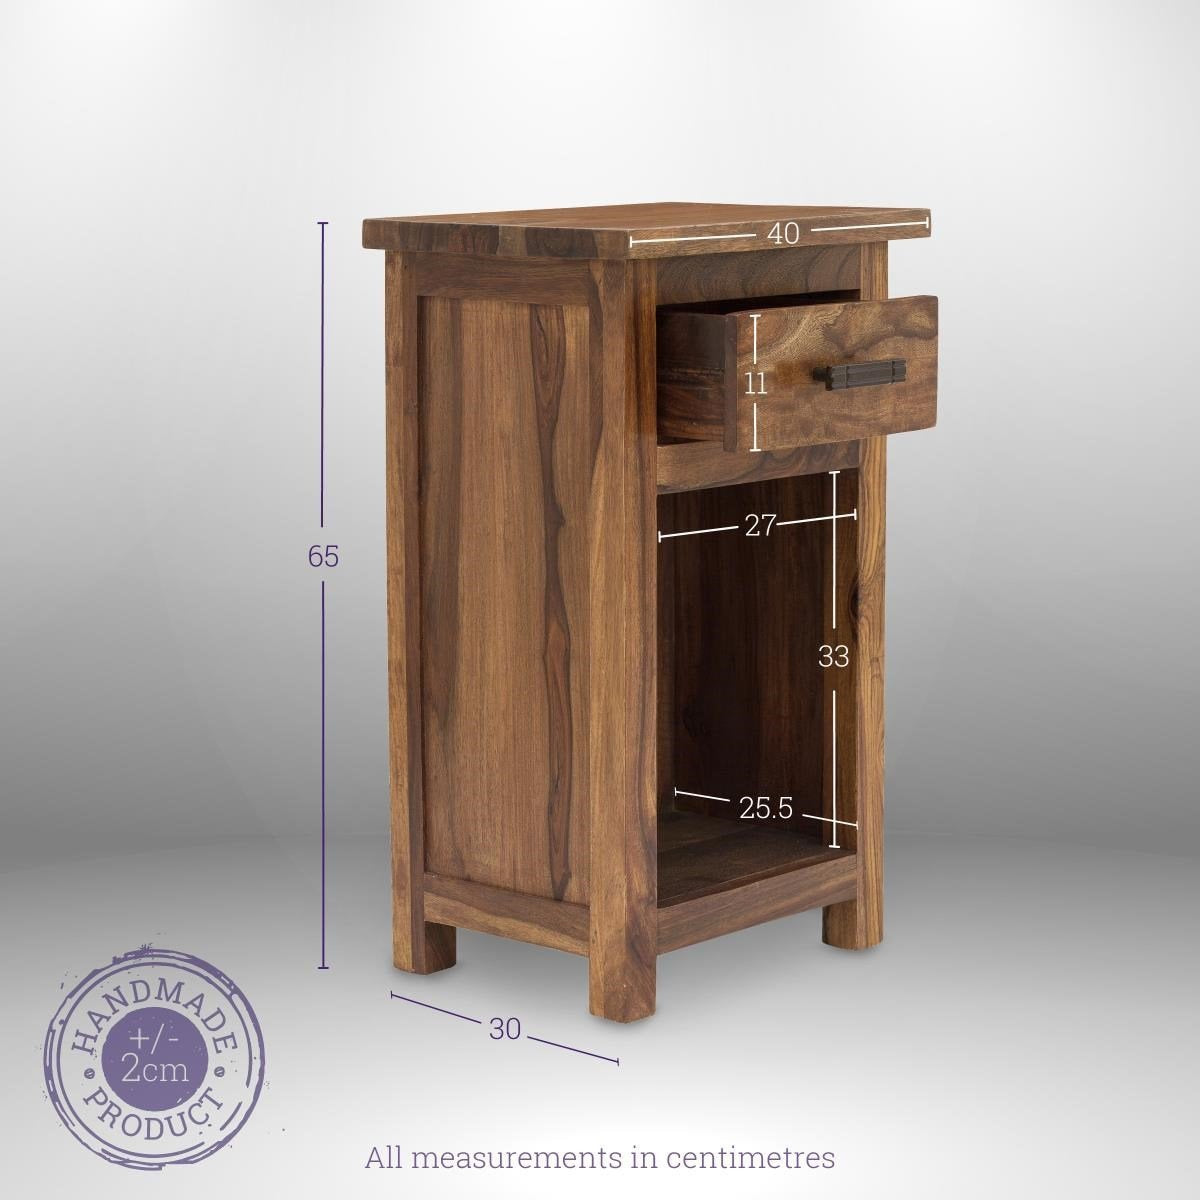 Wooden Bedside table - Gladiolus Collection